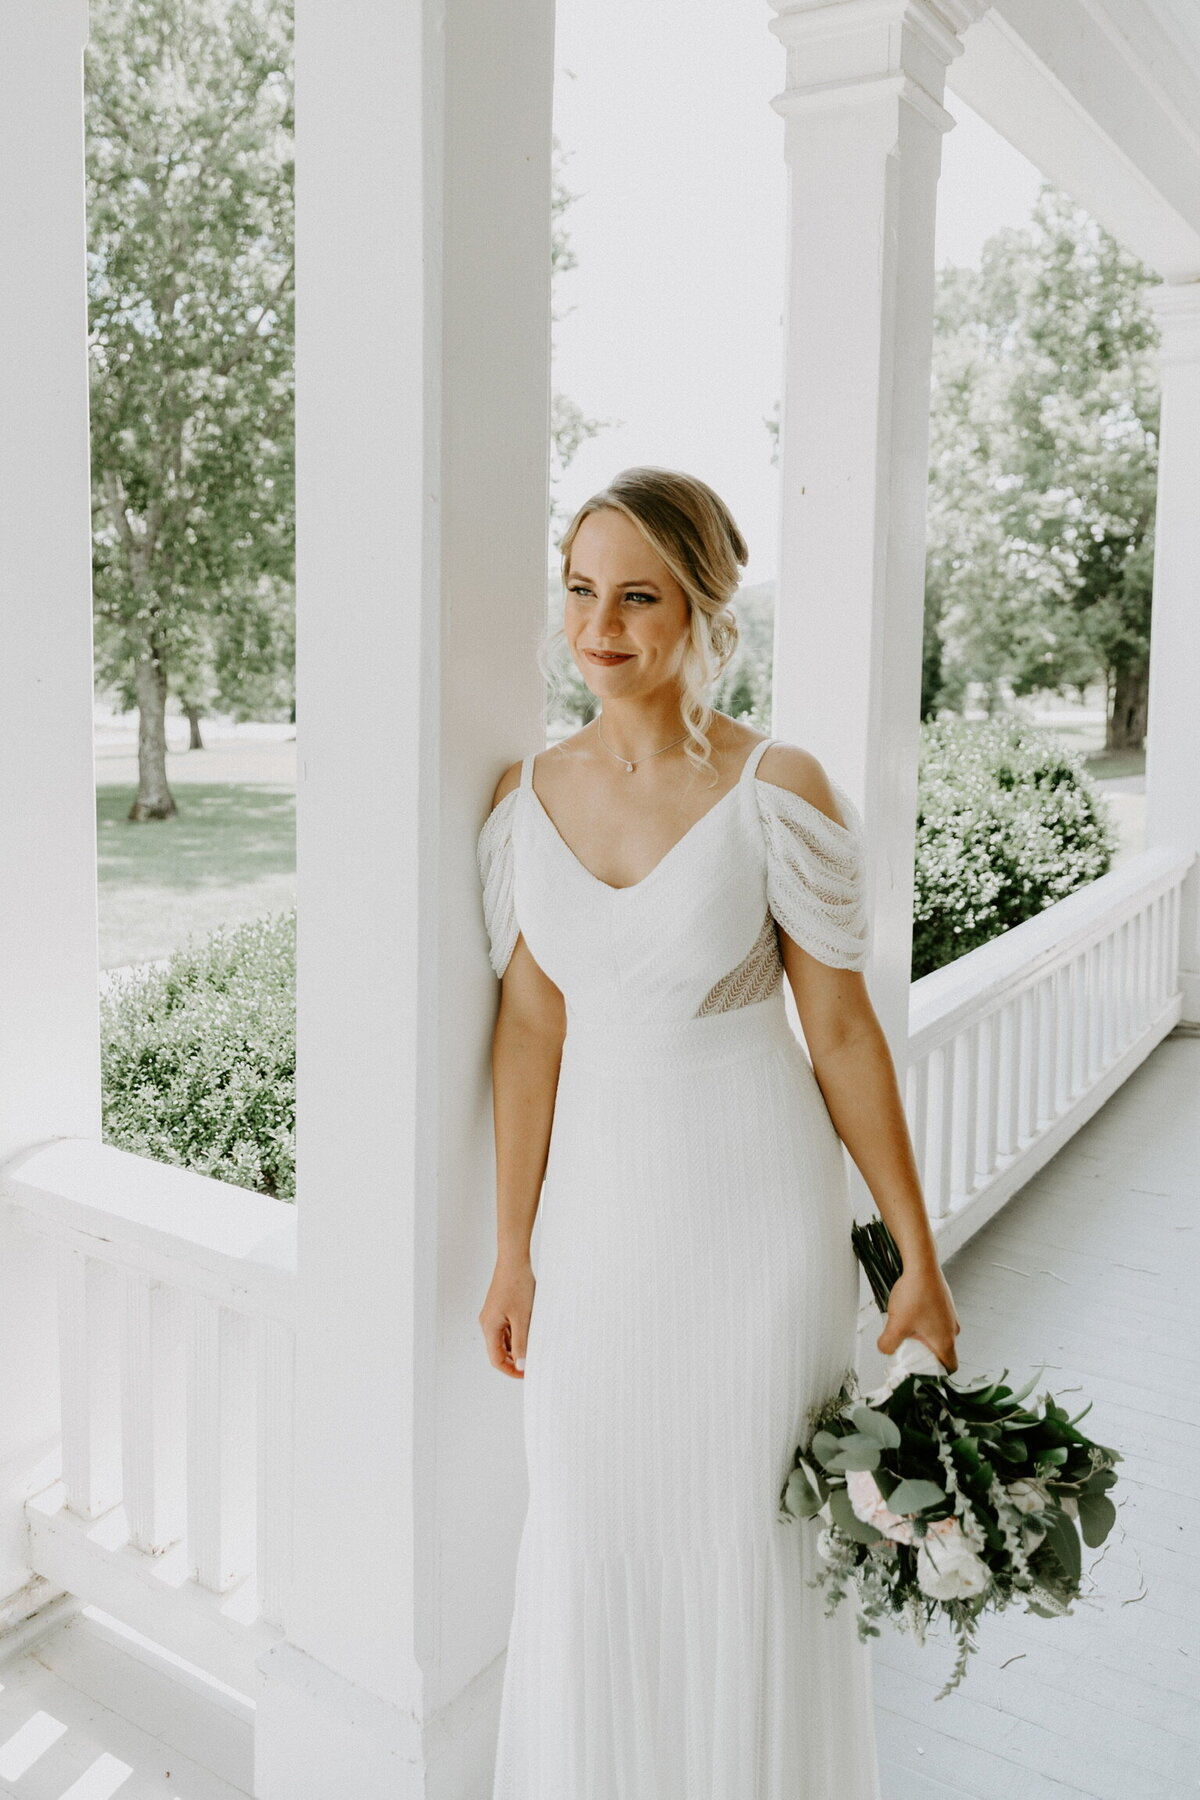 Wedding Packages for Hair and Makeup in Nashville